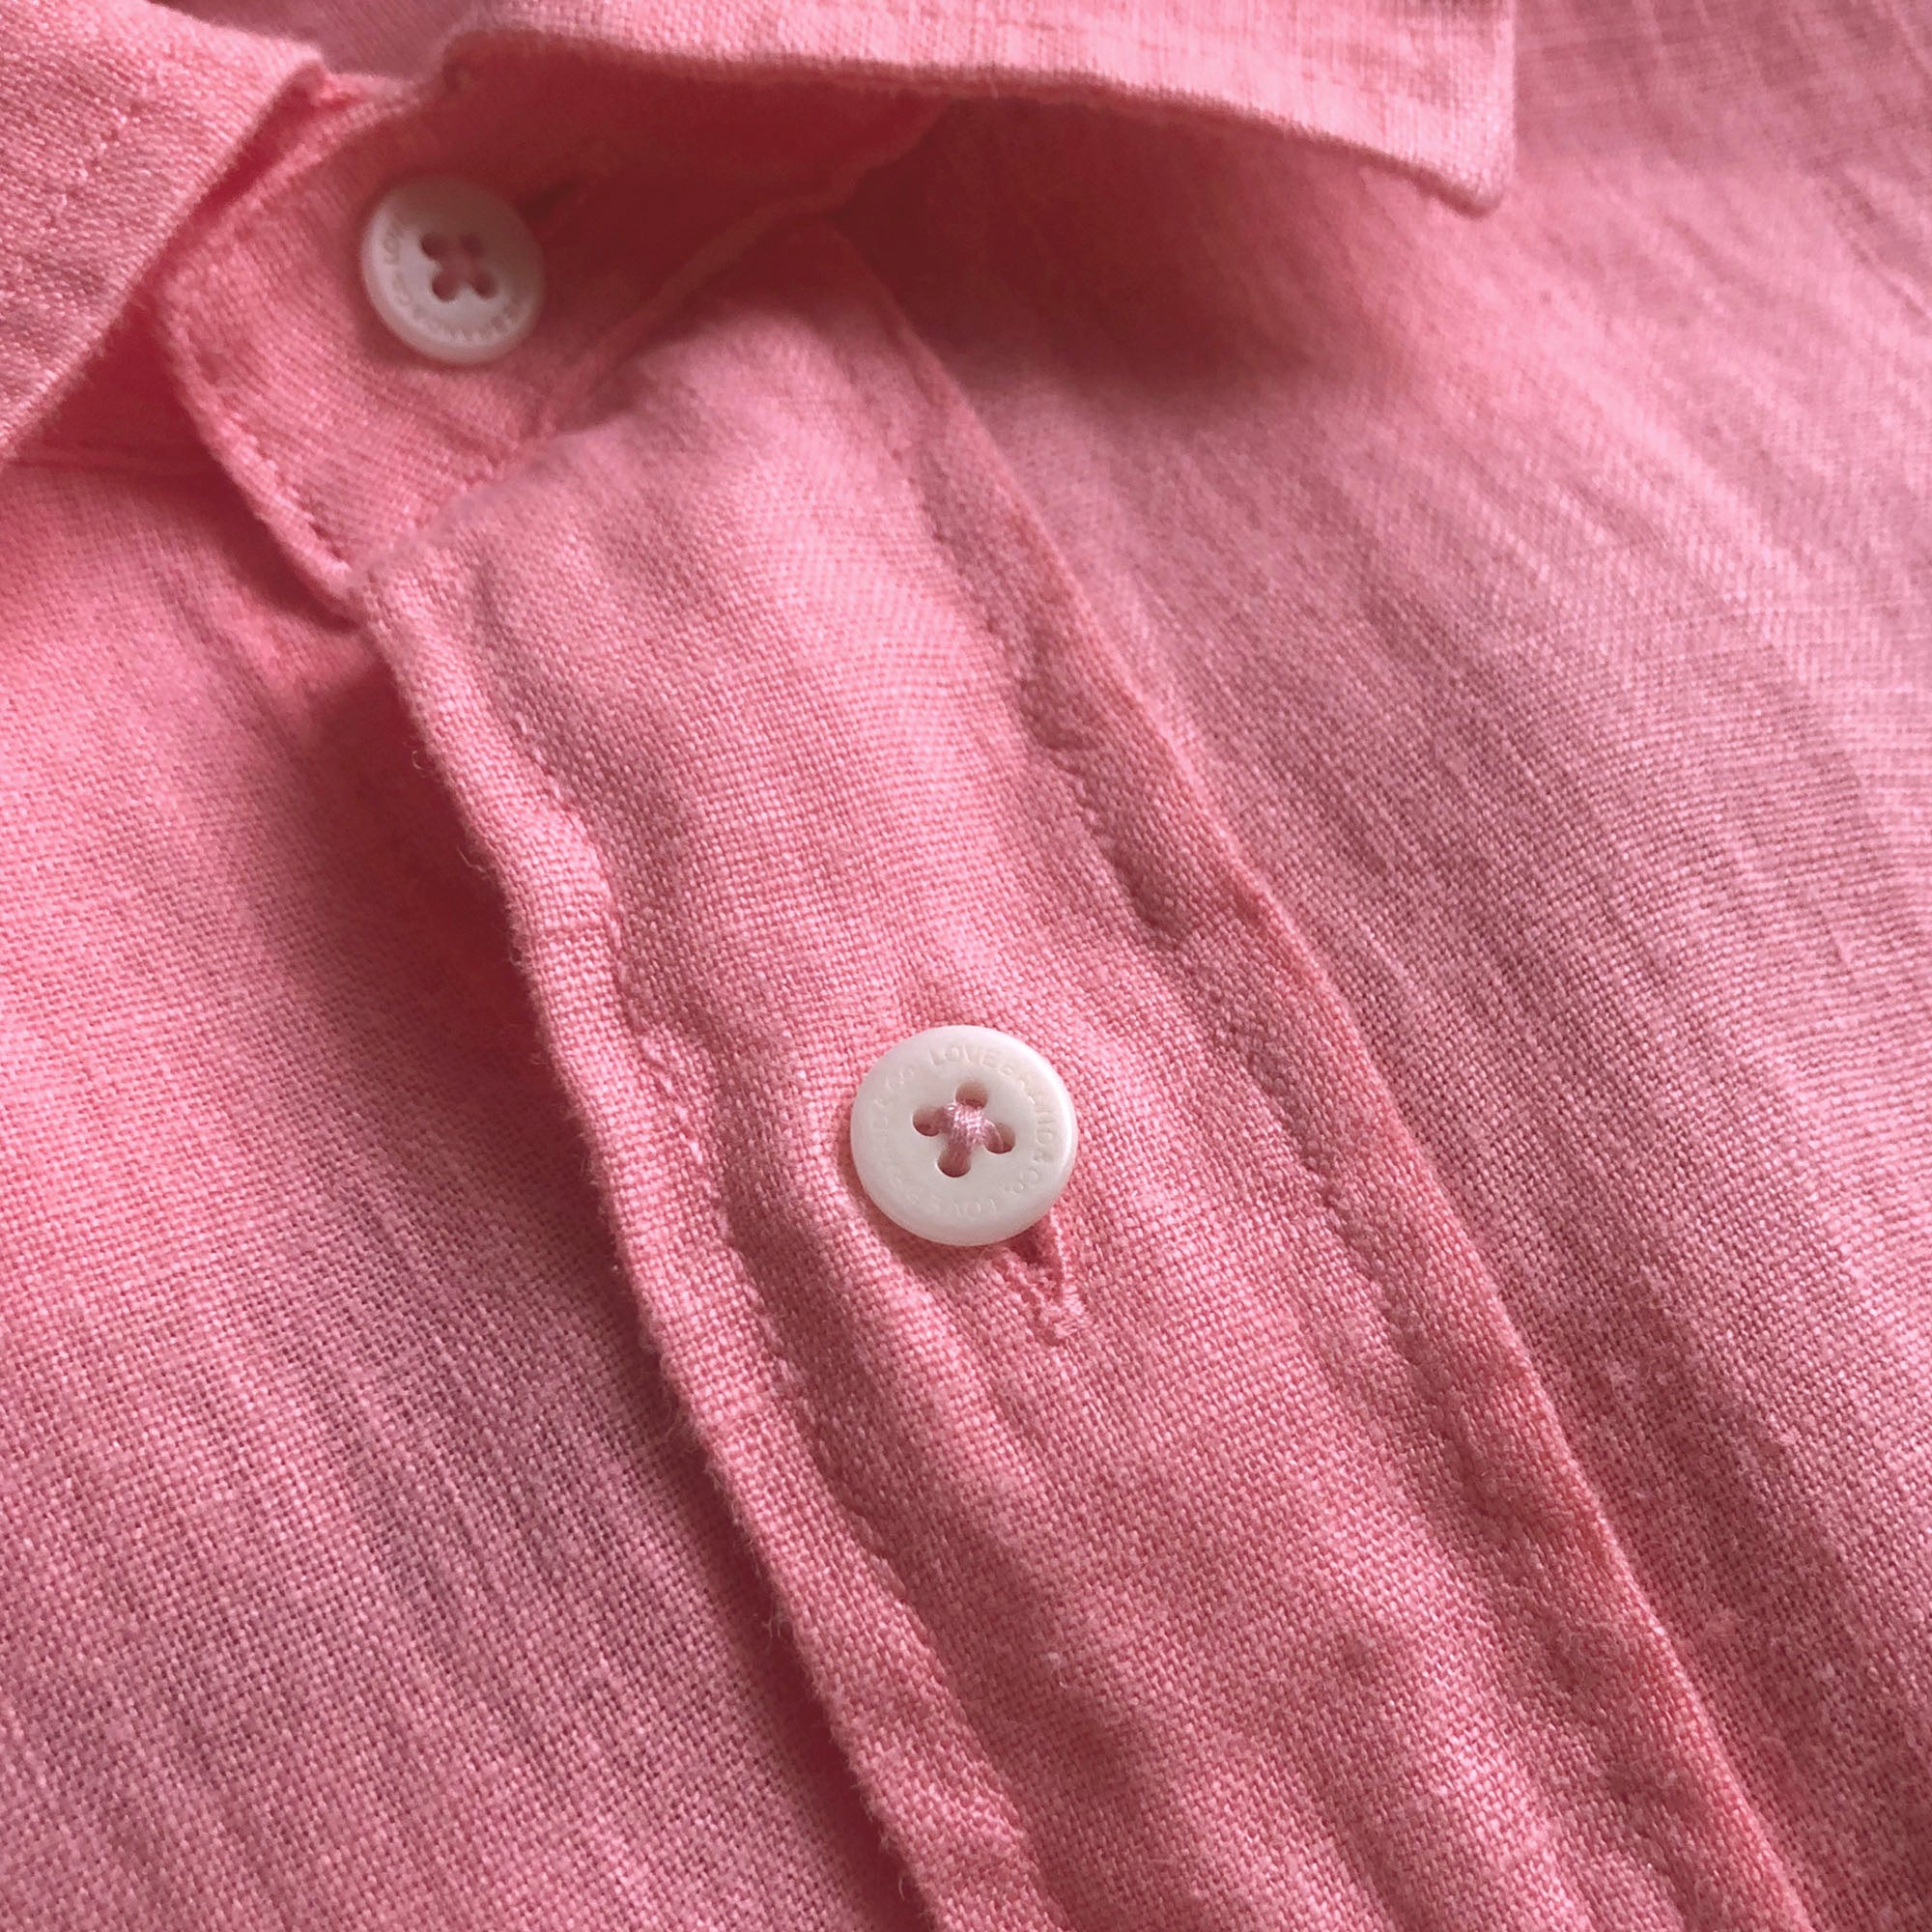 Close-up of the Men's Watermelon Abaco Linen Shirt with white buttons.